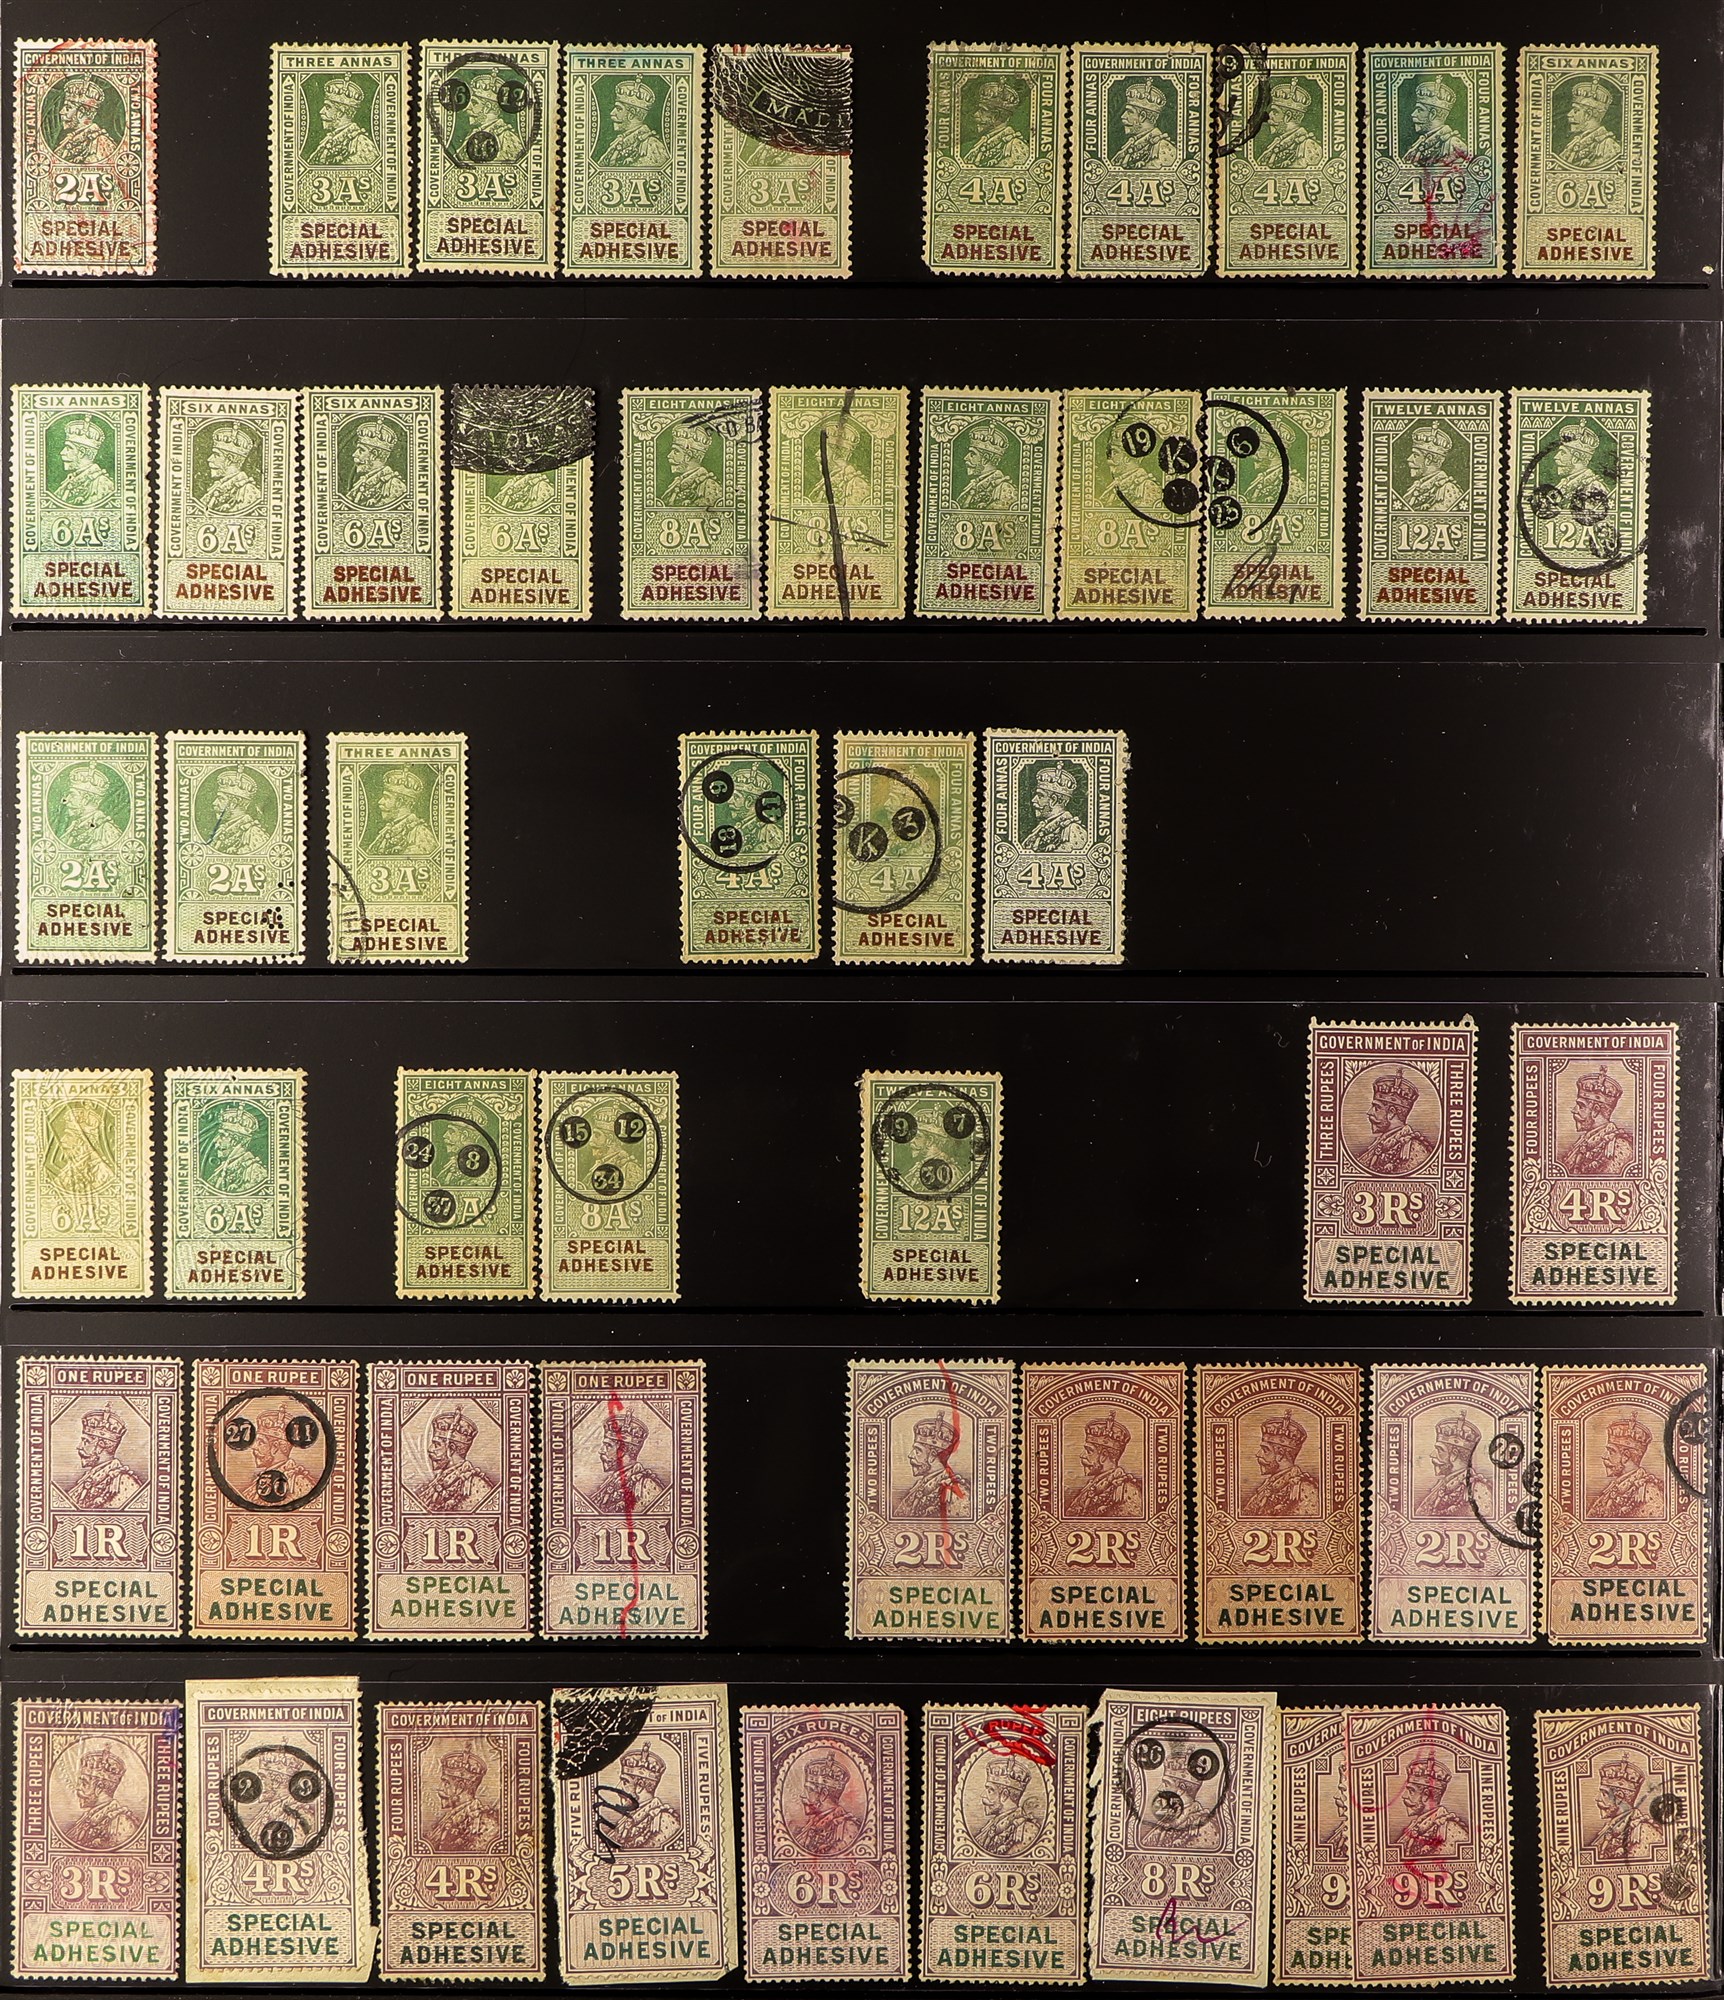 INDIA REVENUE STAMPS 1866 - 1975 collection of over 330 Special Adhesives on protective pages, - Image 4 of 8